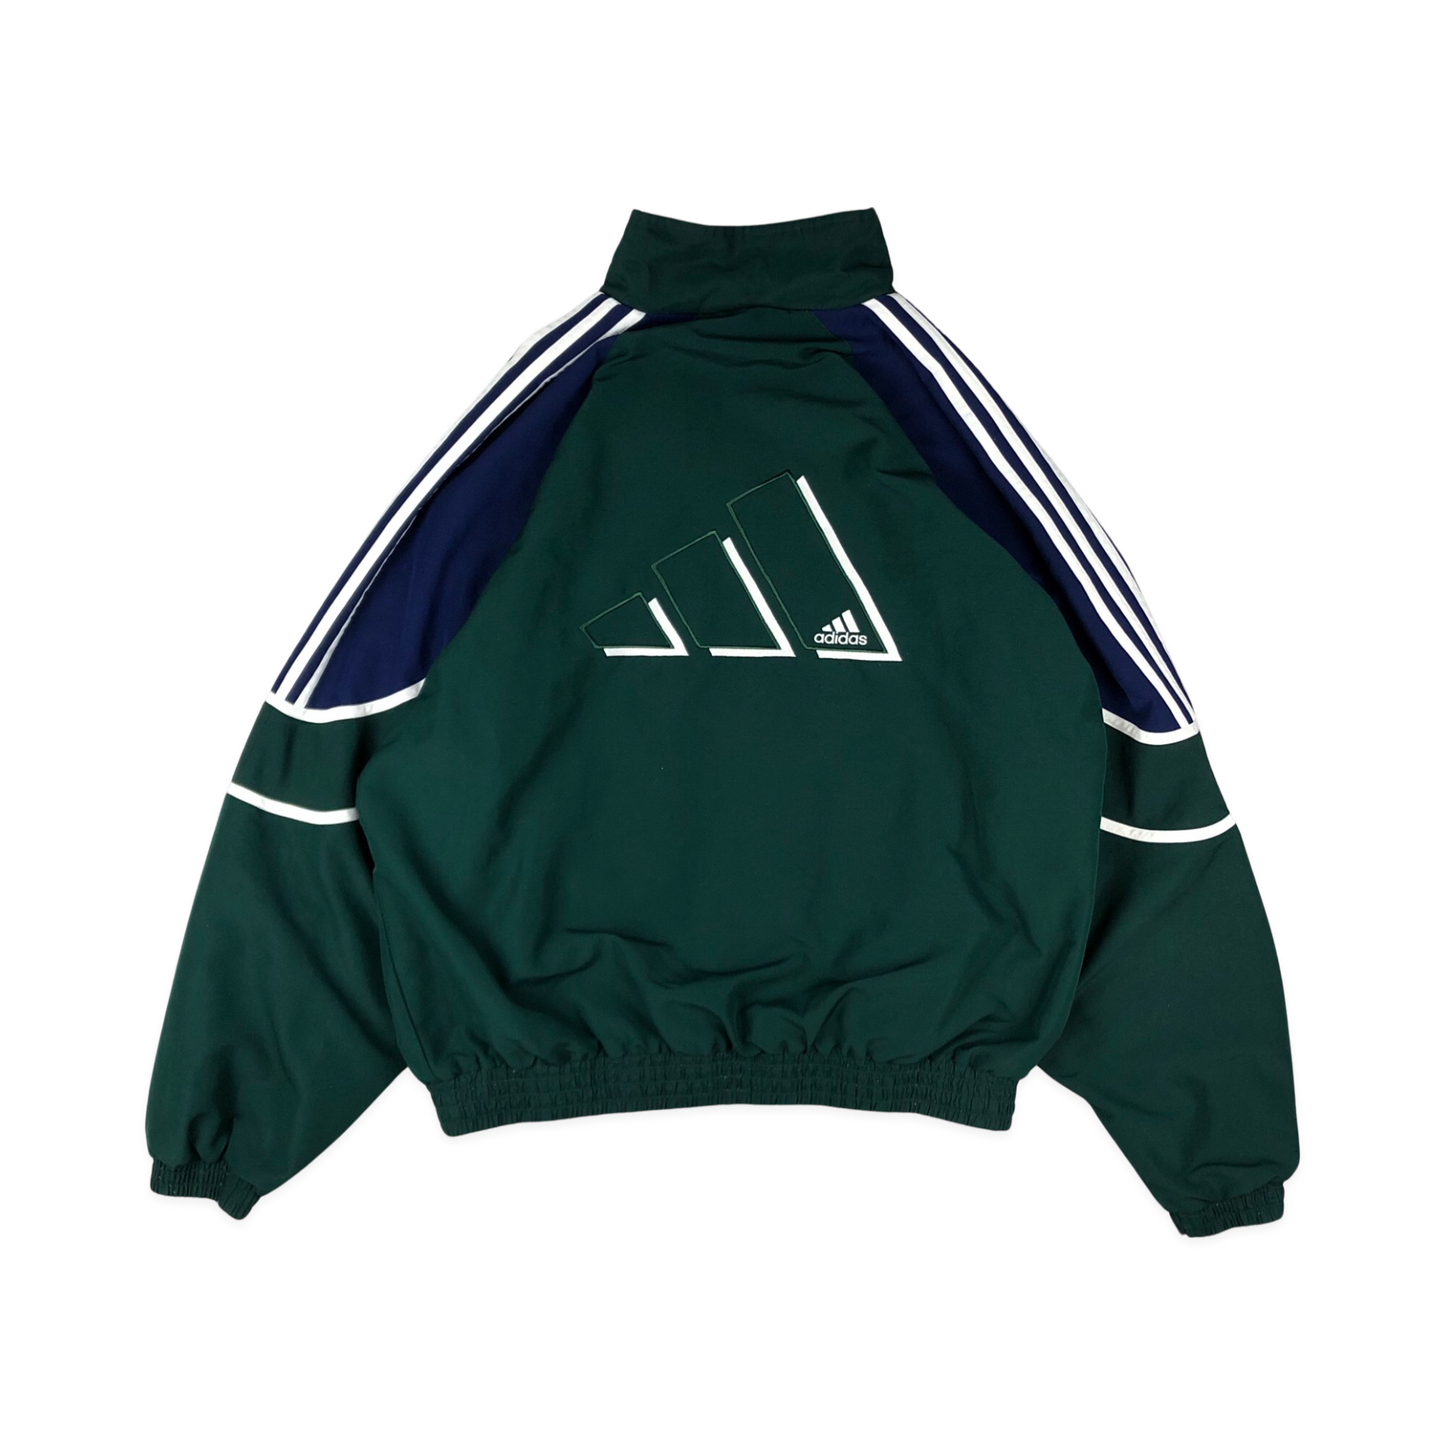 Vintage 90s Adidas Green and Blue Zip-up Coat 3XL